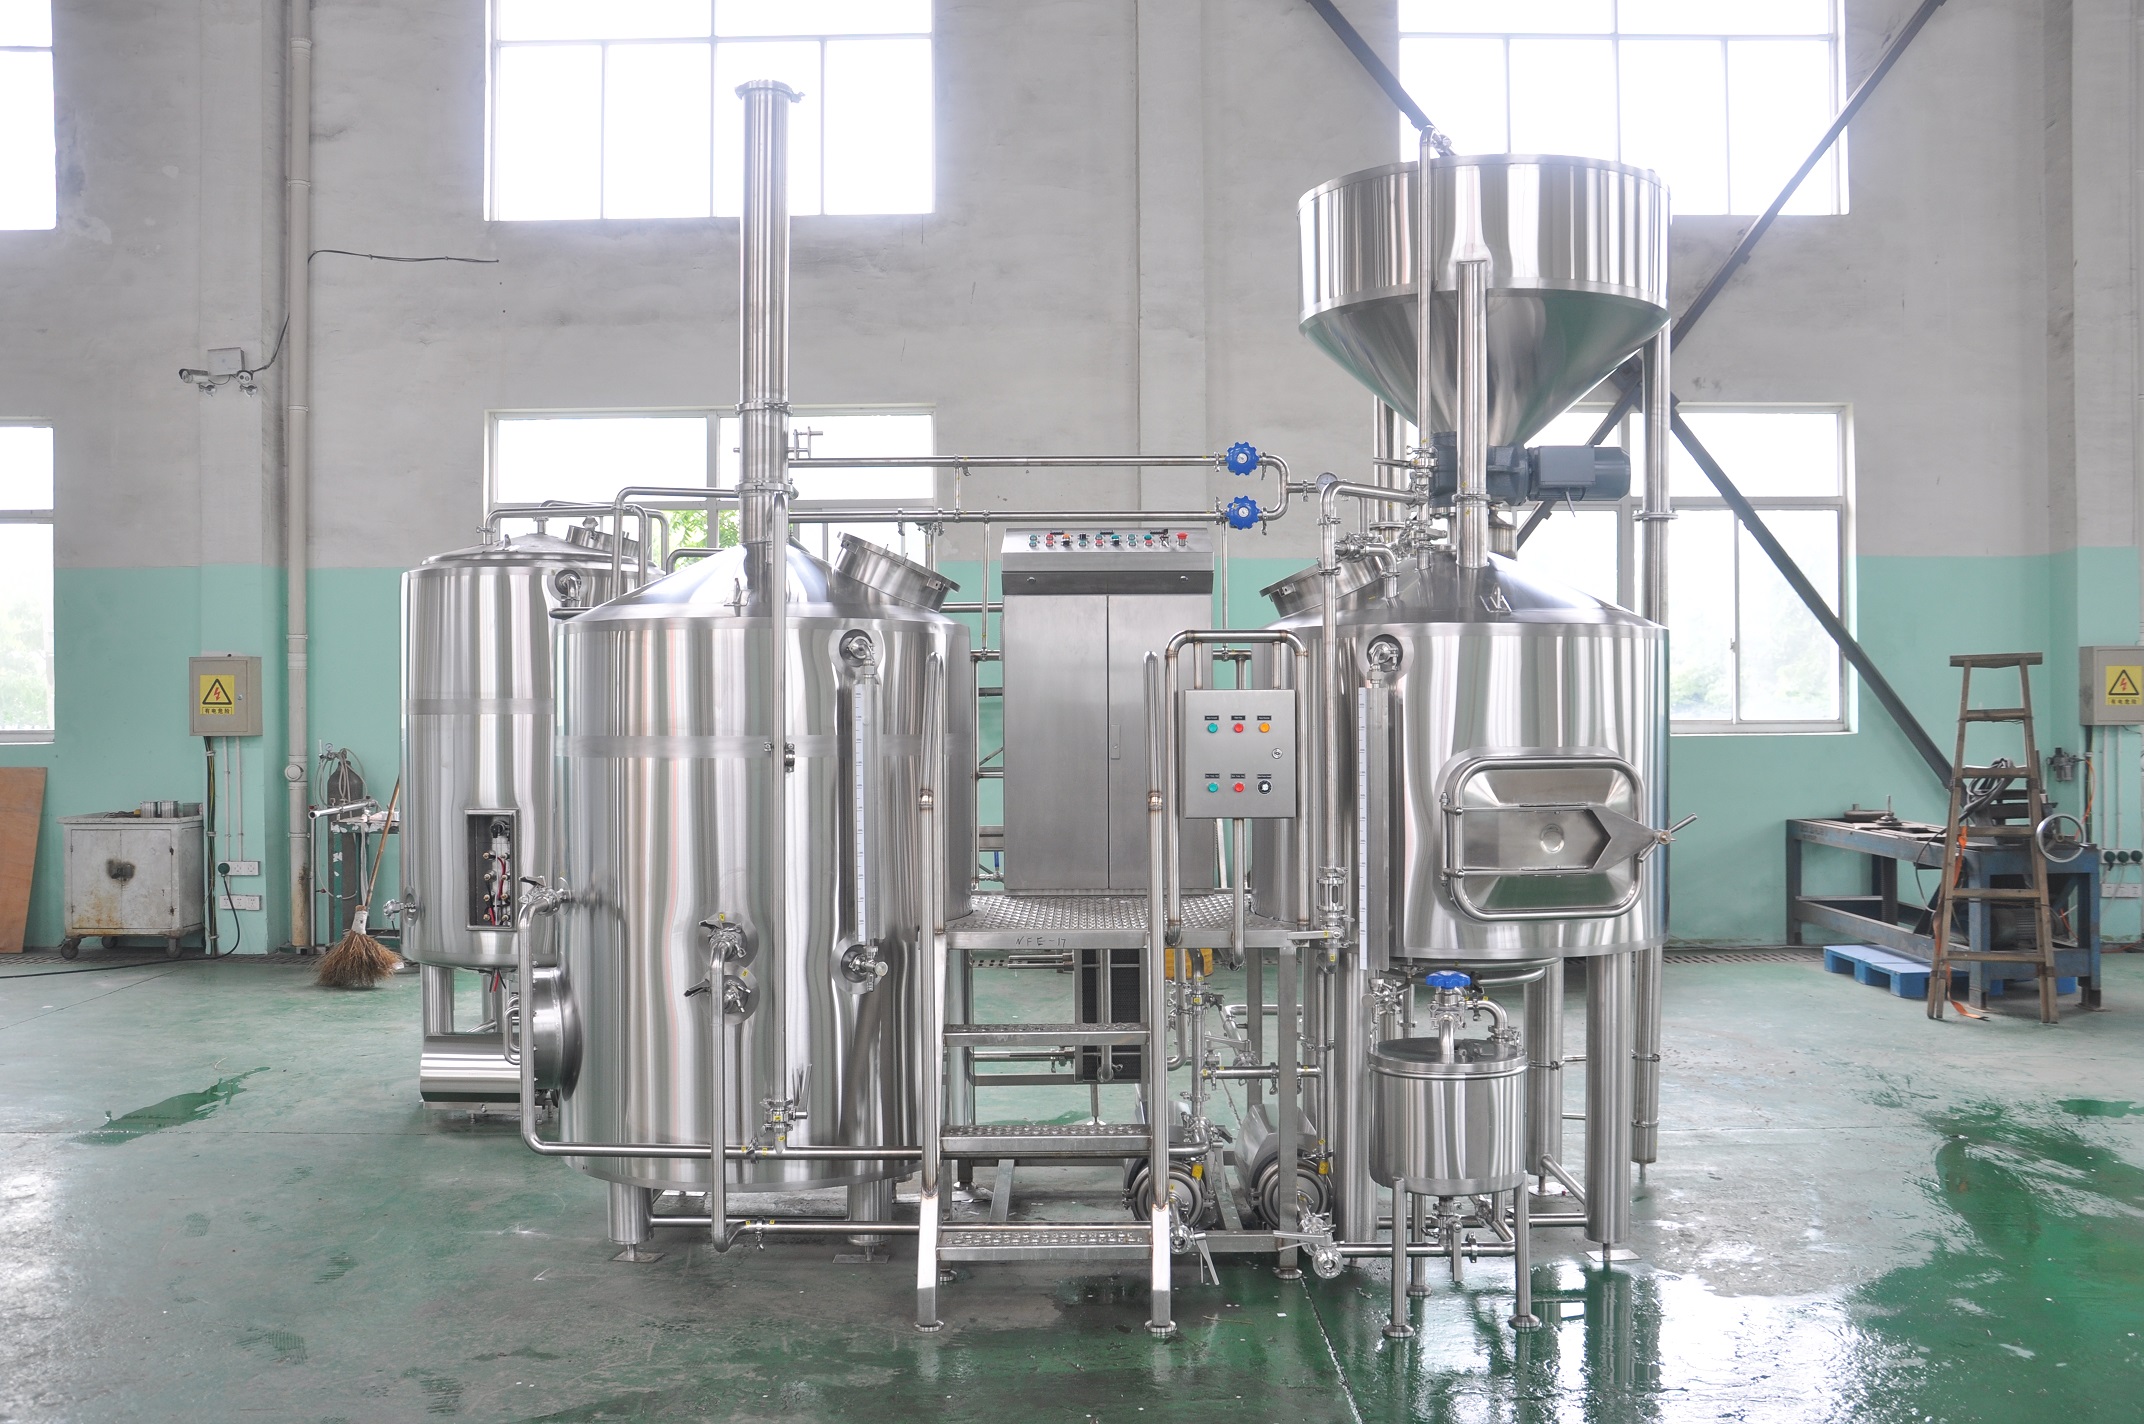 How To Choose Indoor Steam Condensation Stack Or Outdoor Steam Venting Device For Your Brewhouse System?